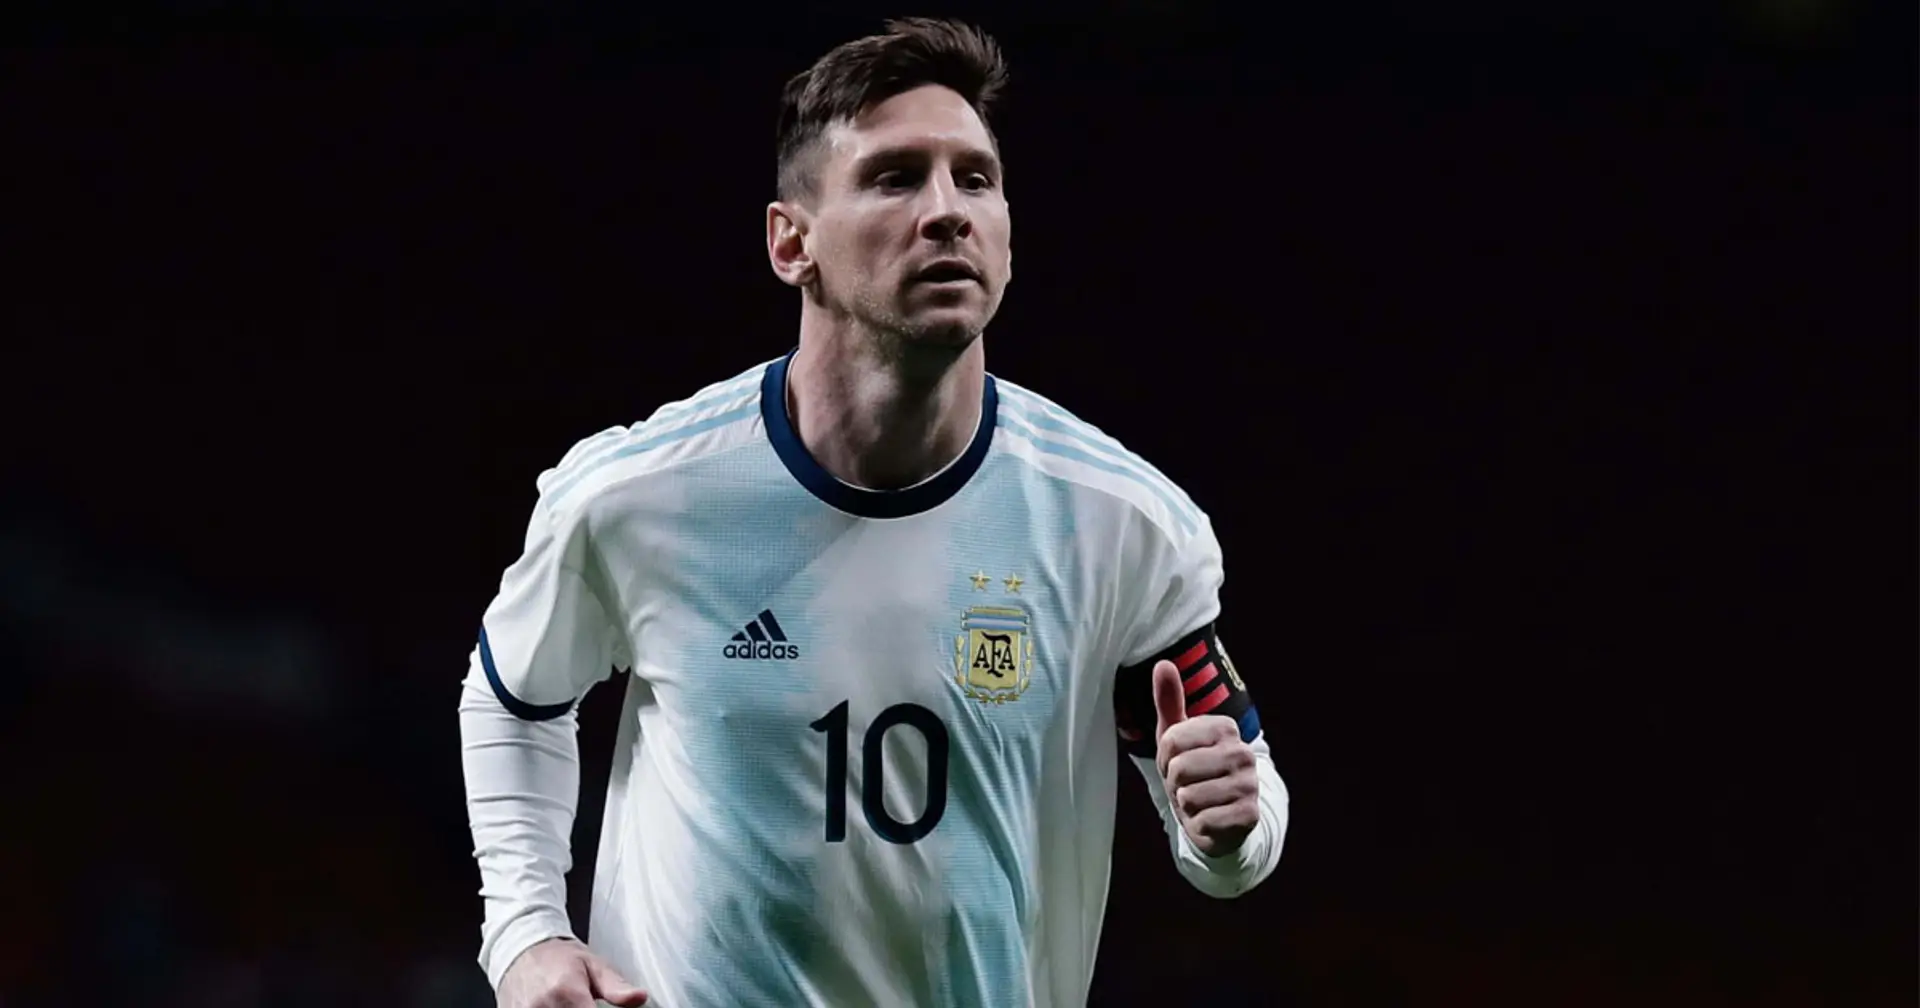 'Take everything away from me but leave me football': Messi sends powerful message ahead of Argentina return